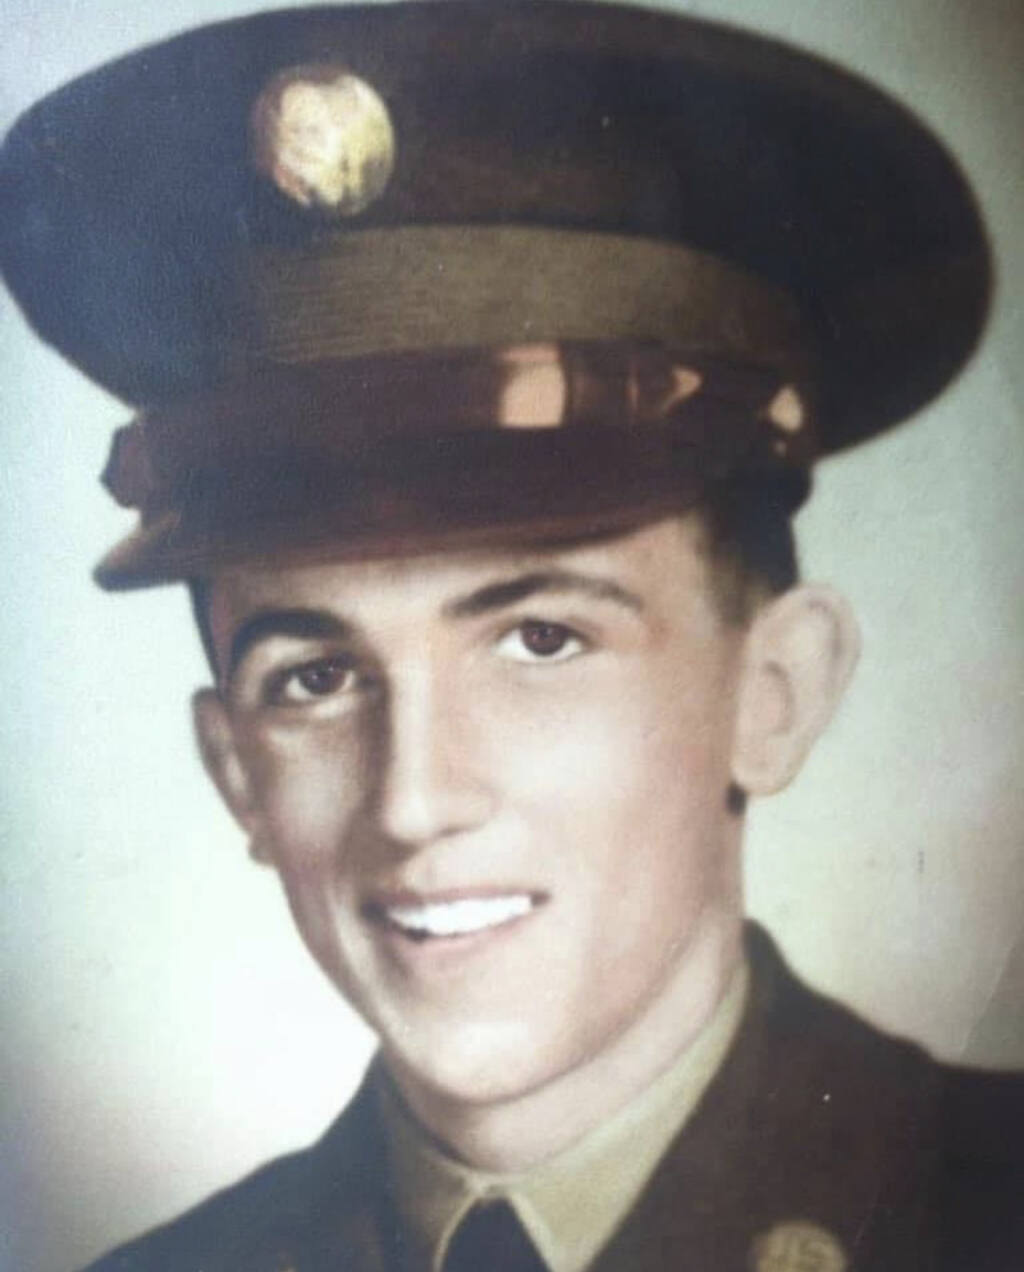 This undated photo provided by the U.S. Defense Department shows Cpl. Joseph J. Puopolo. The solider from Massachusetts who went missing during the Korean War and was later reported to have died in a prisoner of war camp has been accounted for using modern scientific techniques, military officials said. Puopolo, 19, of East Boston, was accounted for in August, according to a statement Friday, Sept. 23, 2022, from the Defense POW/MIA Accounting Agency. (U.S. Defense Department via AP)